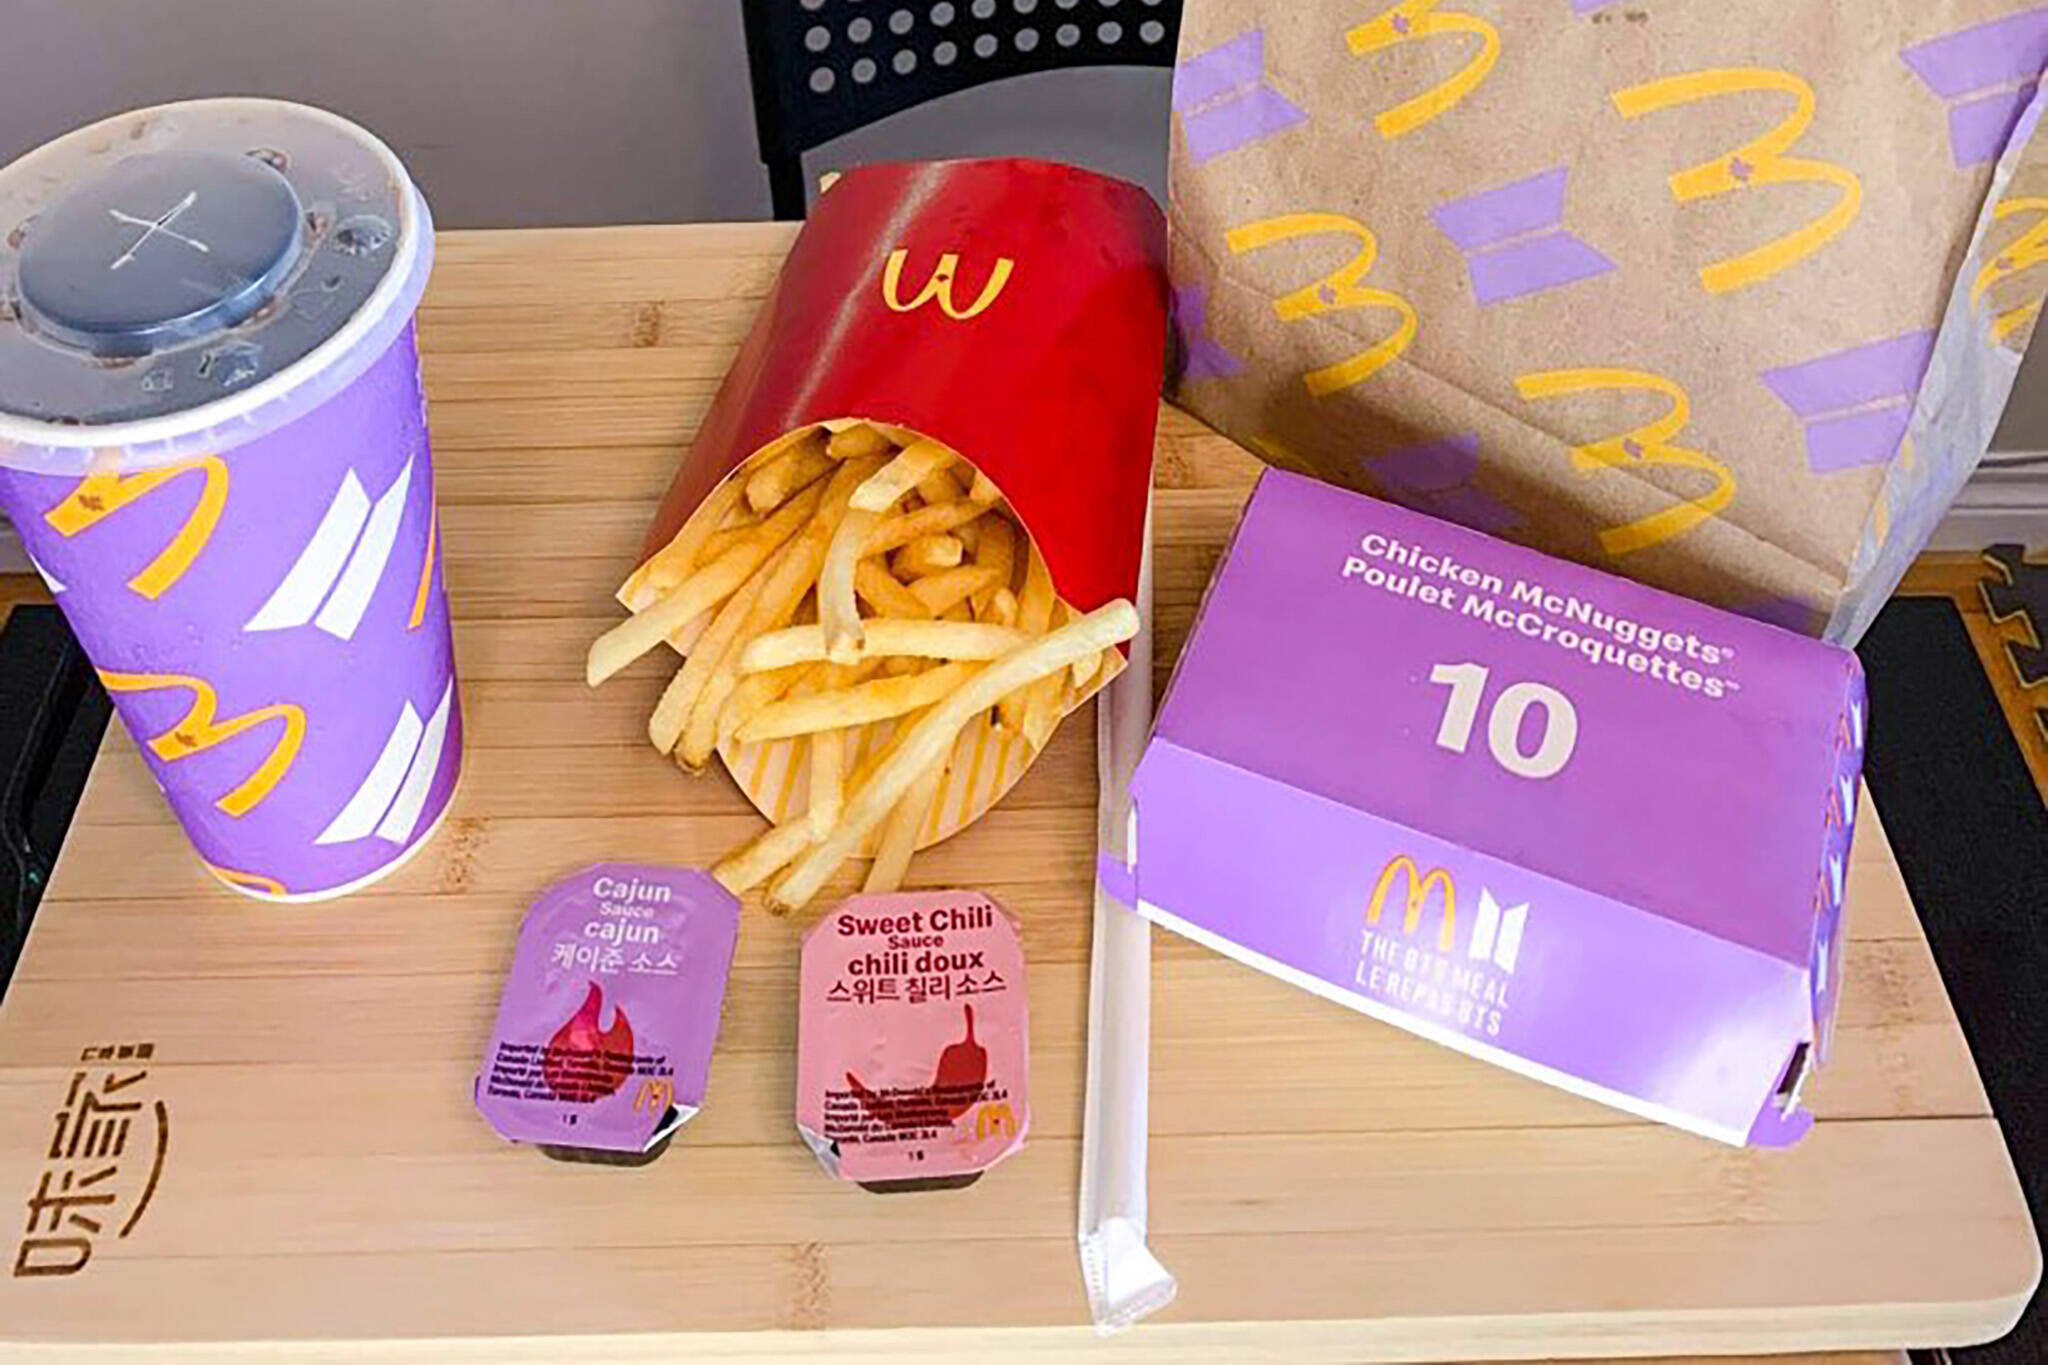 Meal mcdonald bts BTS meaning